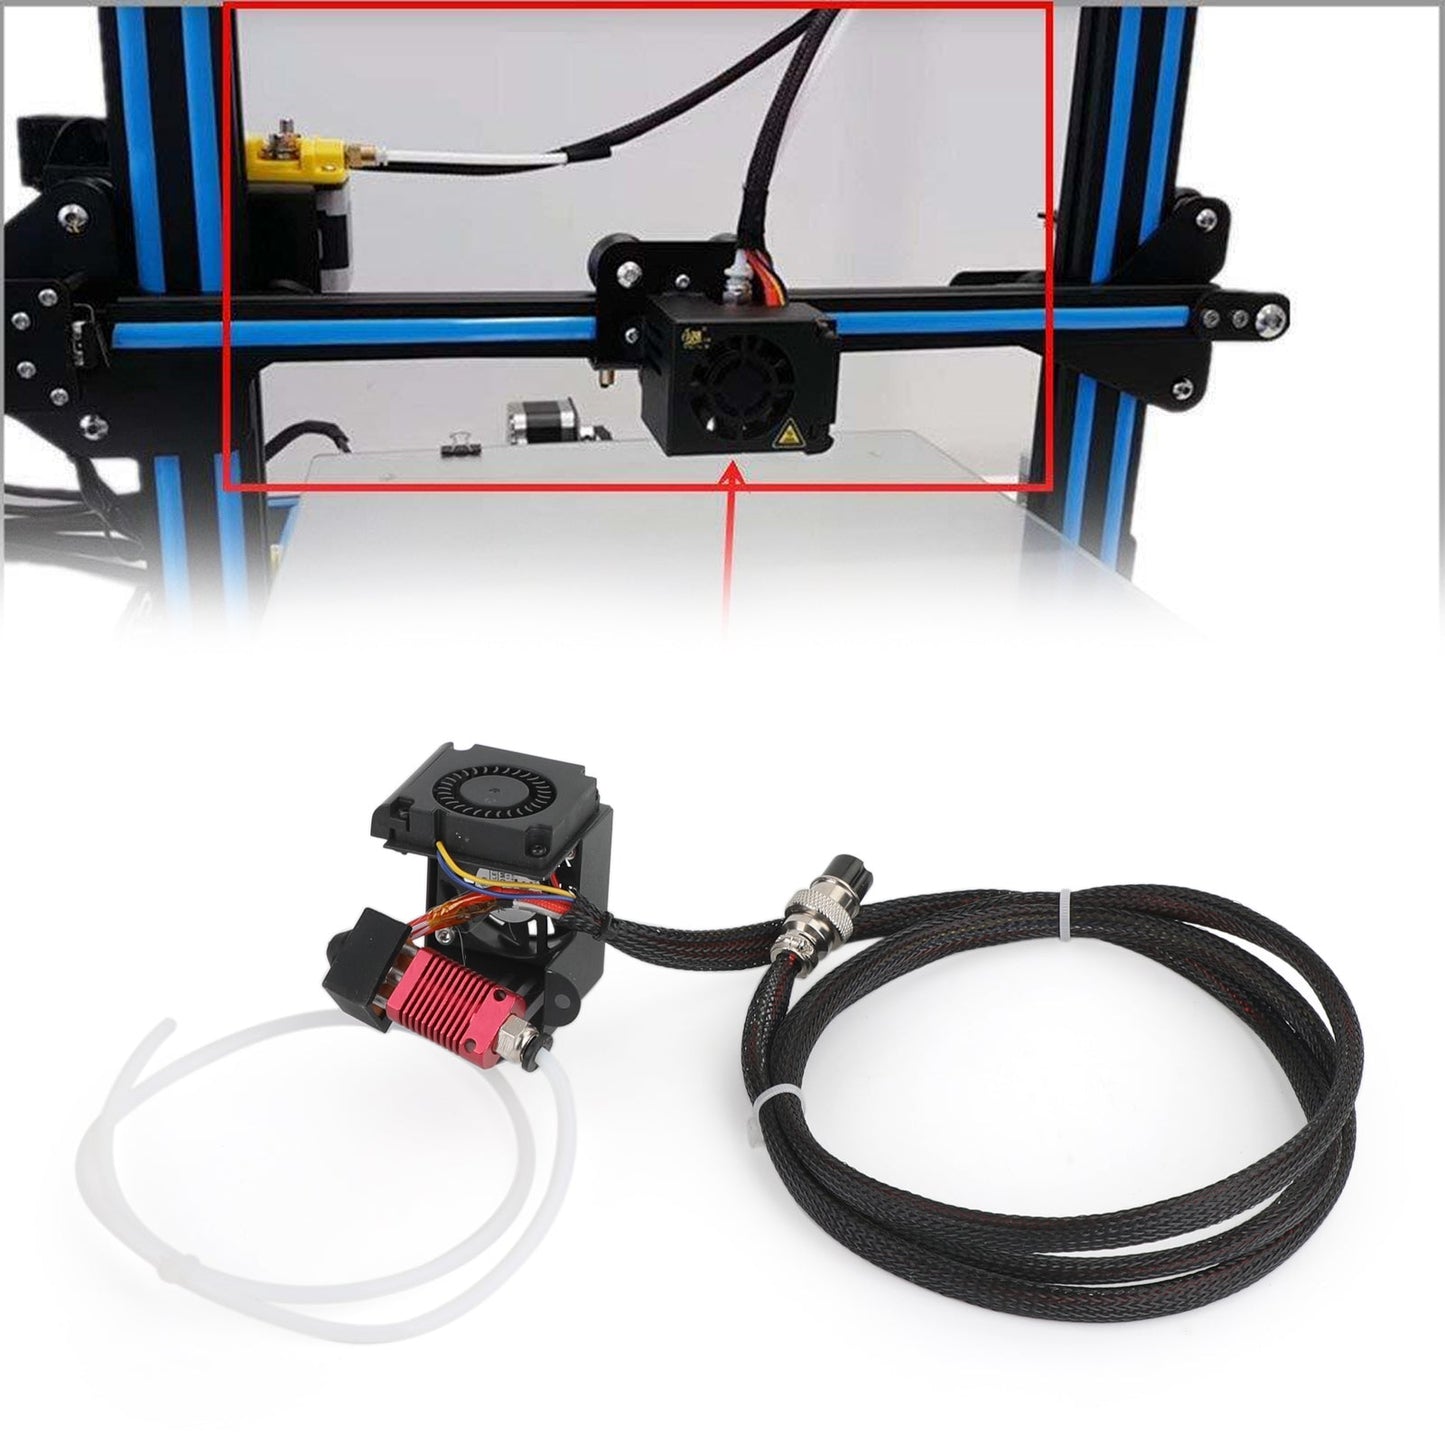 Full Assembled Extruder Kits Air Connections Nozzle for CR-10 S4 S5 CR10S